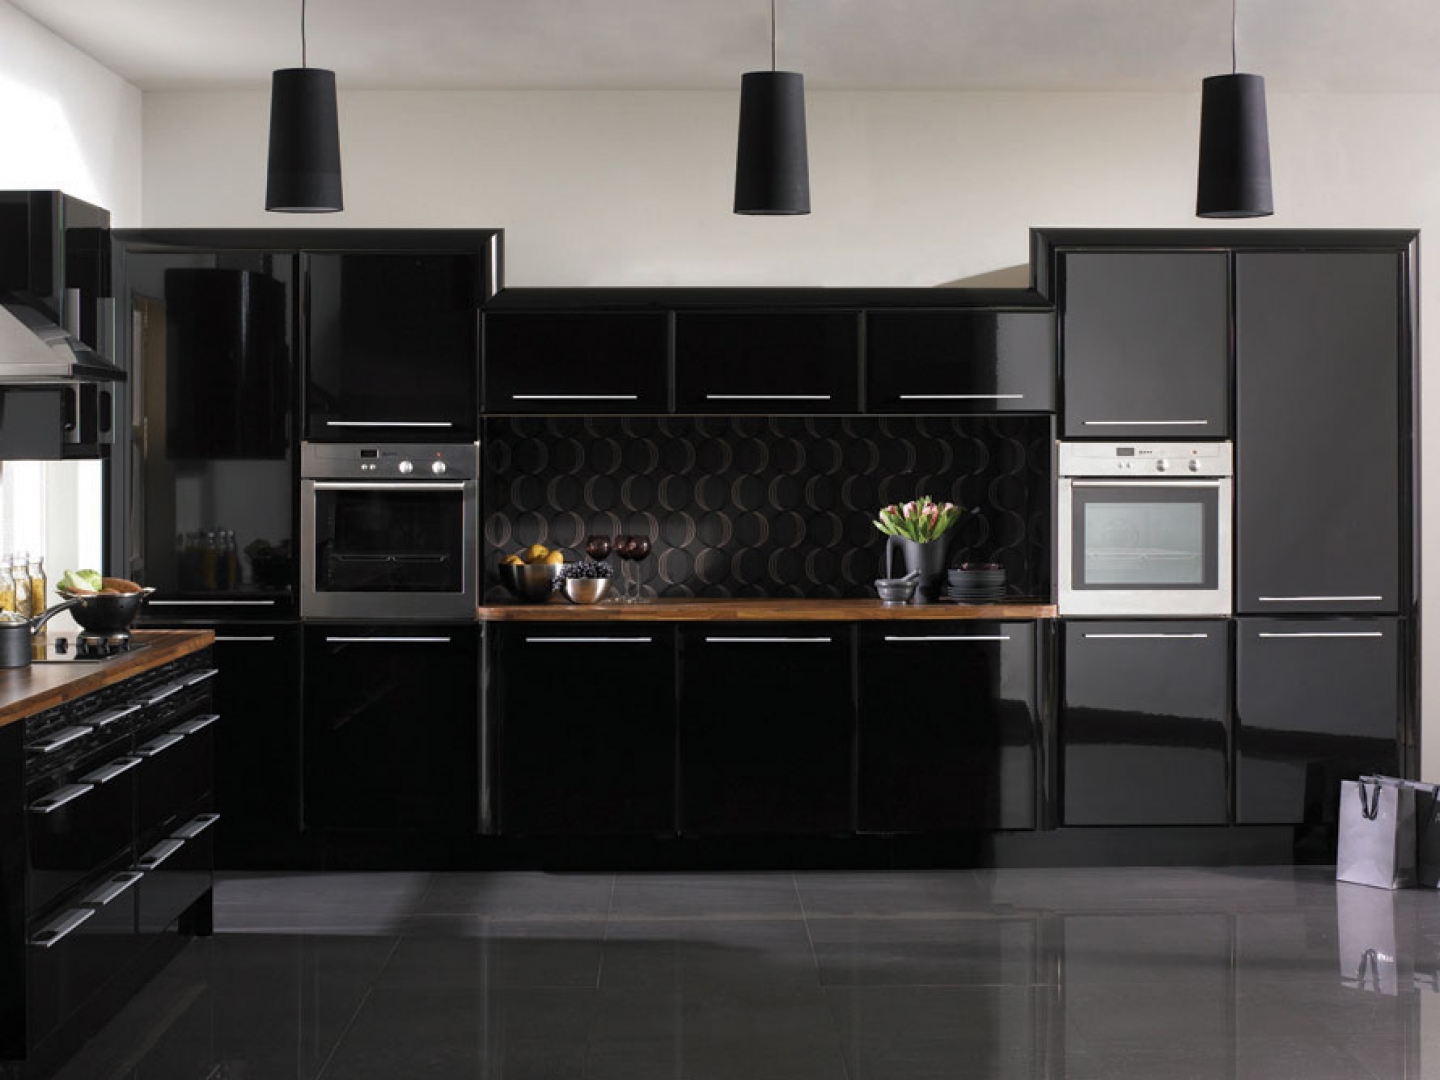 Black Kitchen 2 The elegance and splendor of black in modern and classic kitchen designs